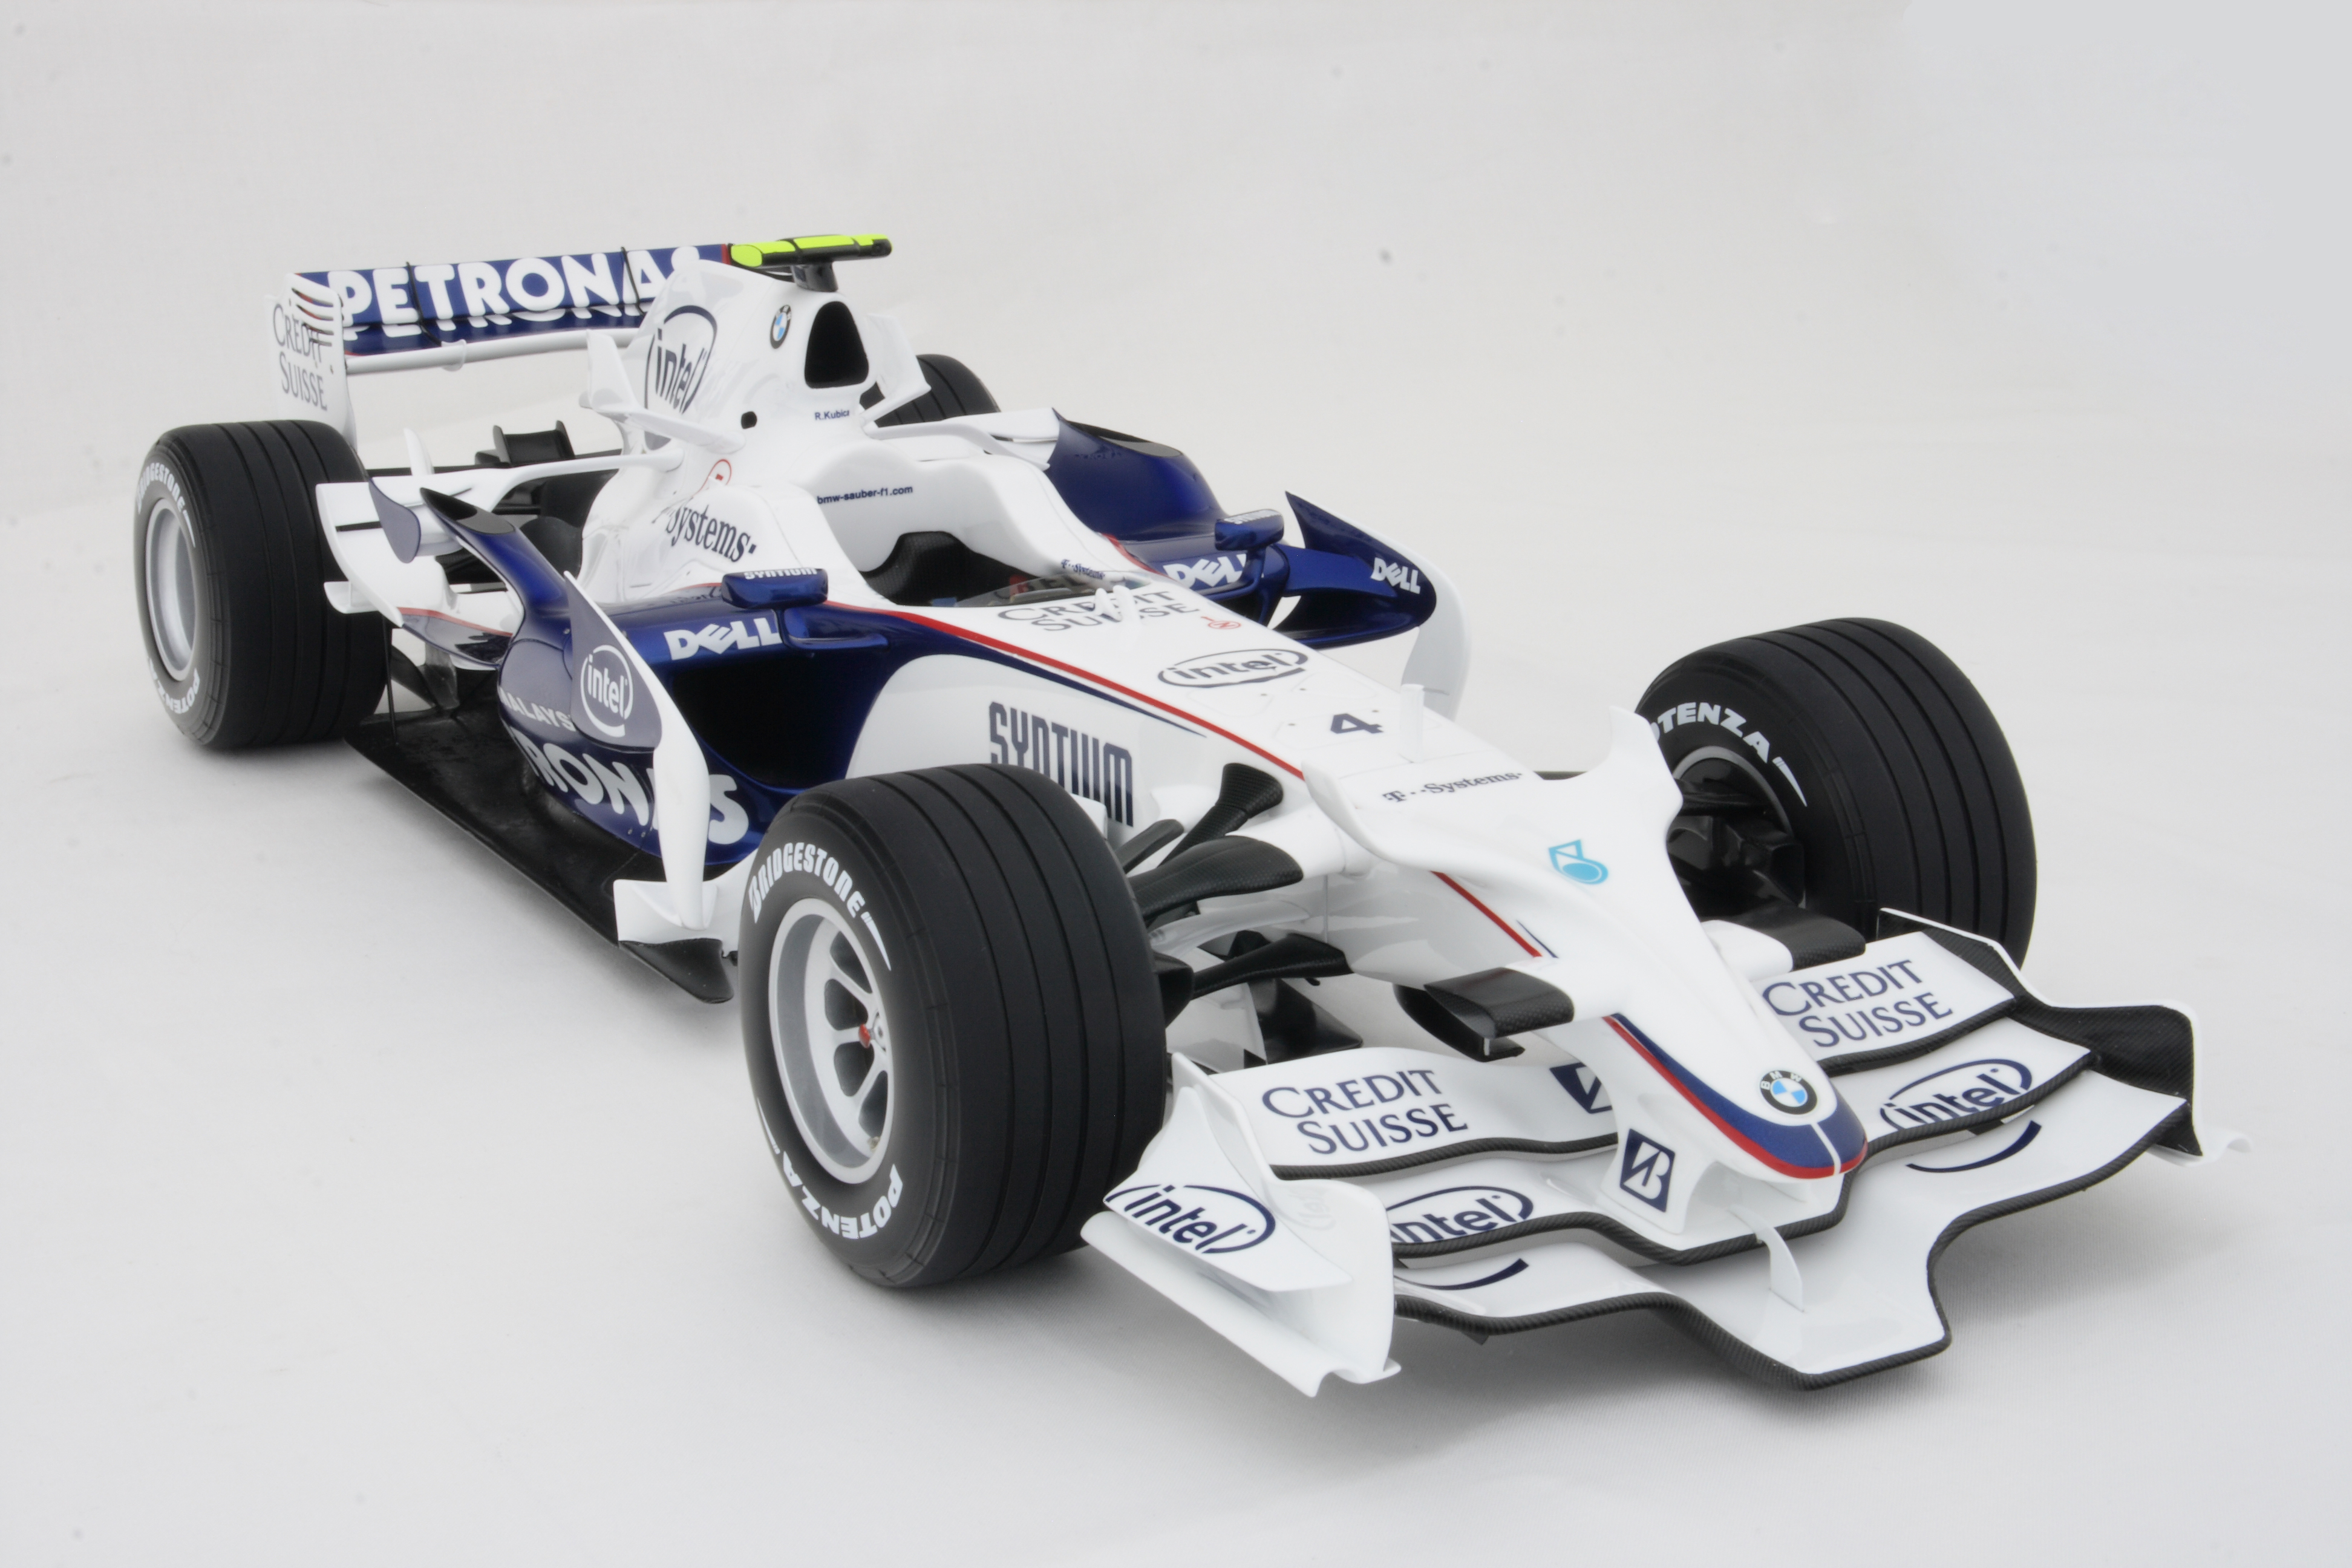 BMW Sauber F108 at 1:8 Scale Gallery